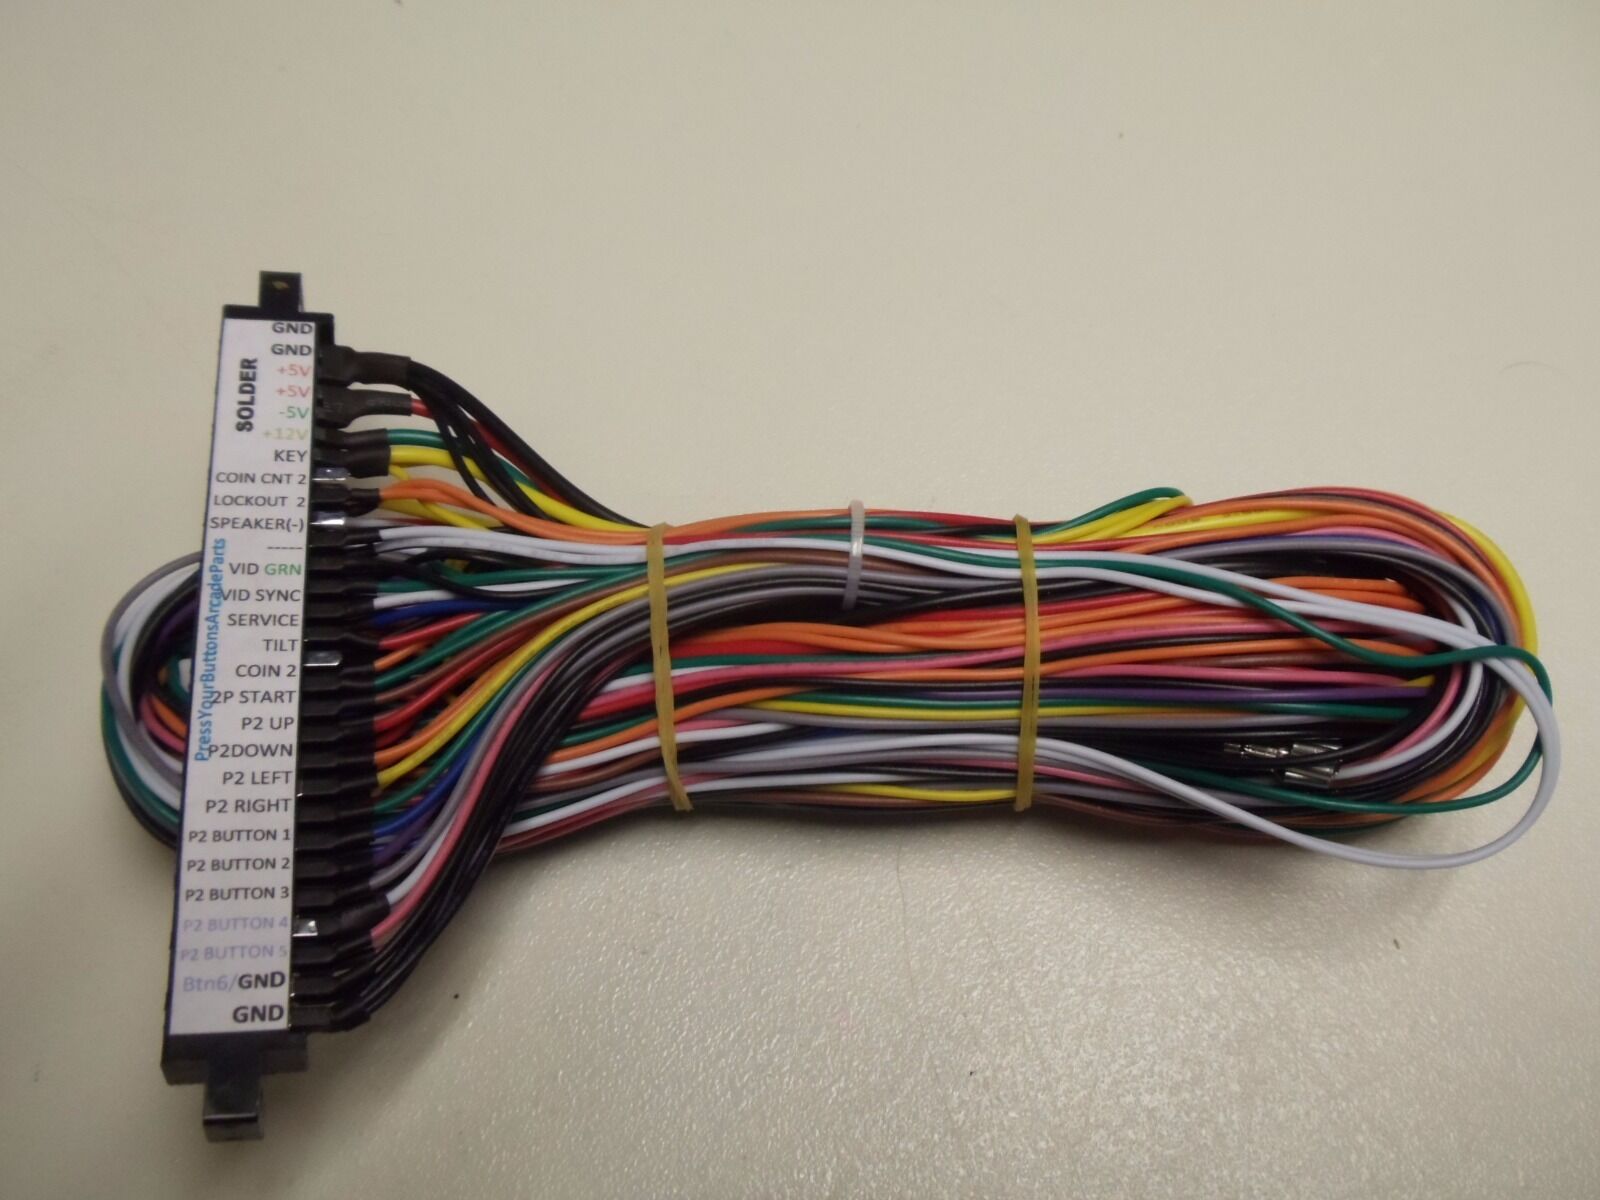 JAMMA Wiring Harness with Wire Id Label Arcade Video Game Multicade 